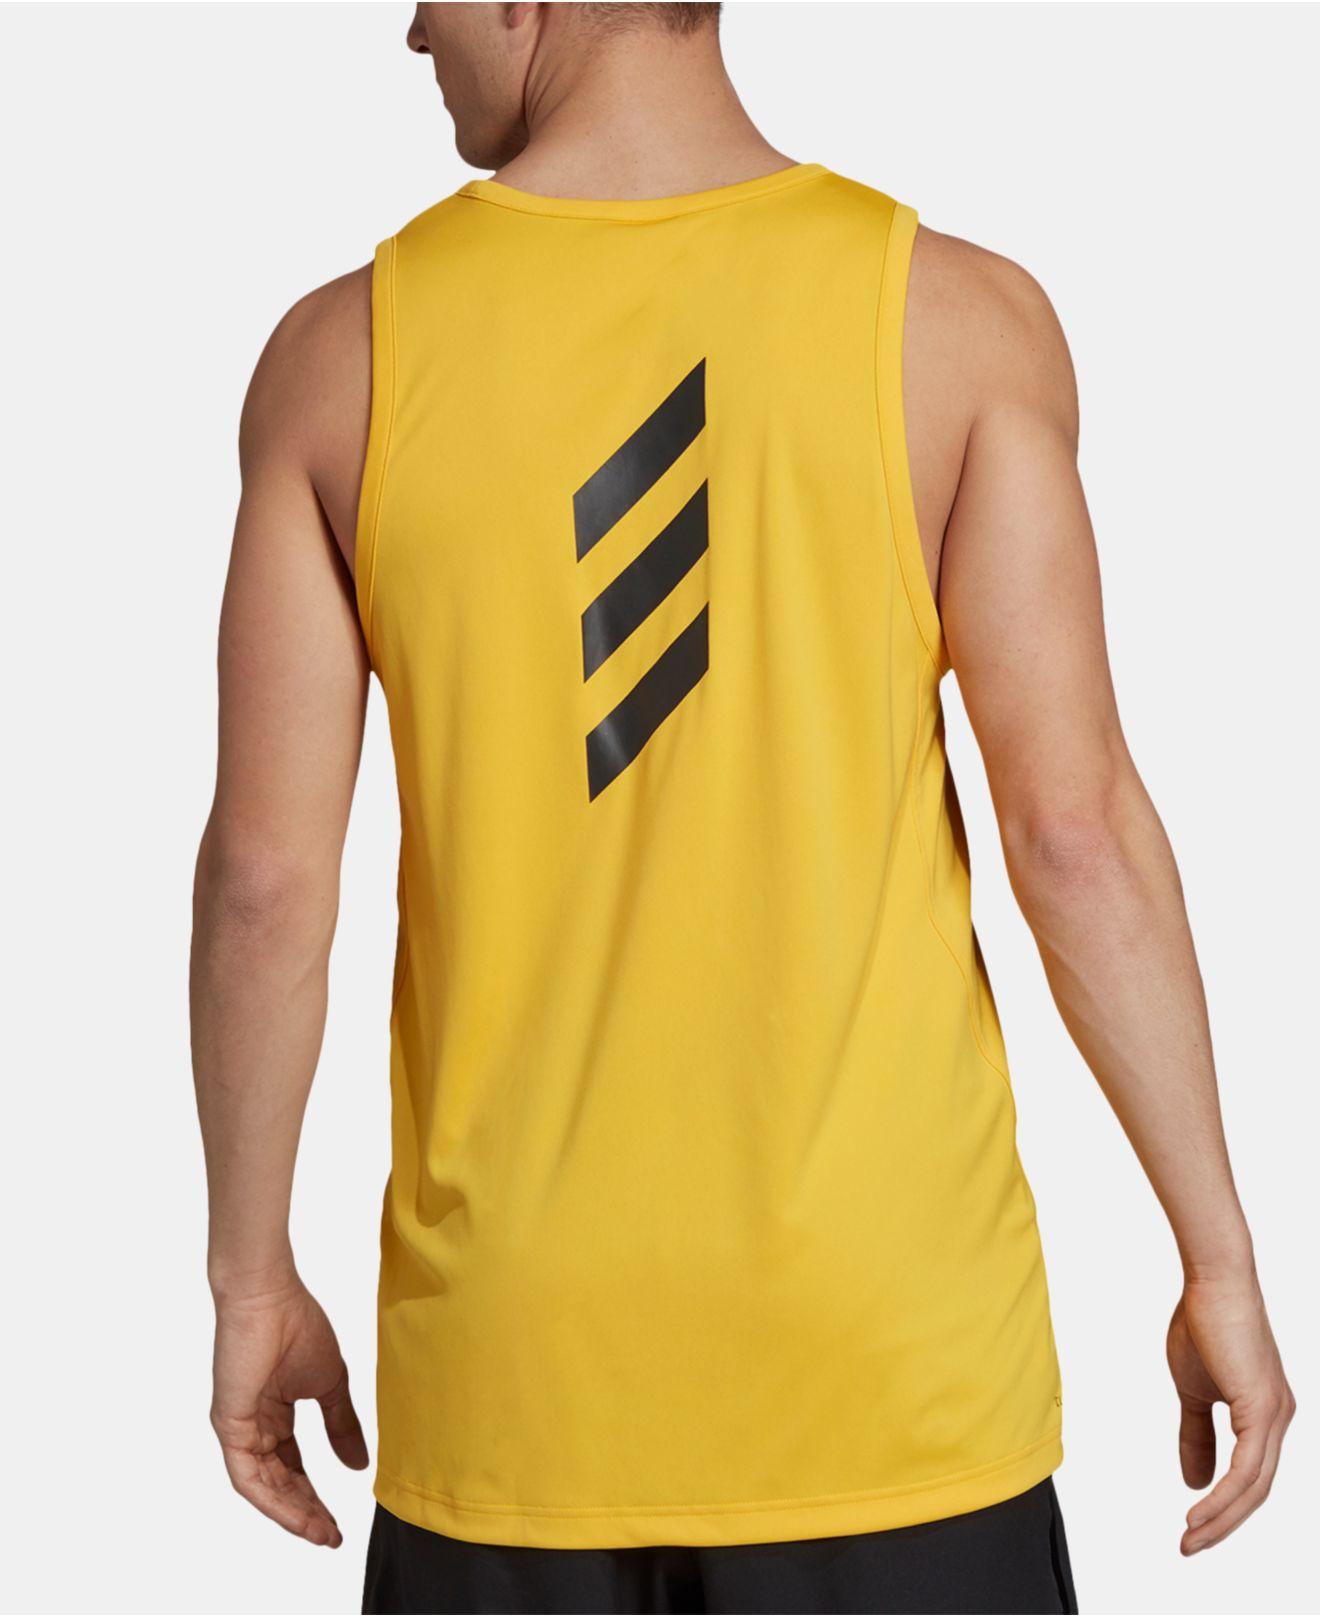 adidas Climalite® Tank Top in Yellow for Men - Lyst